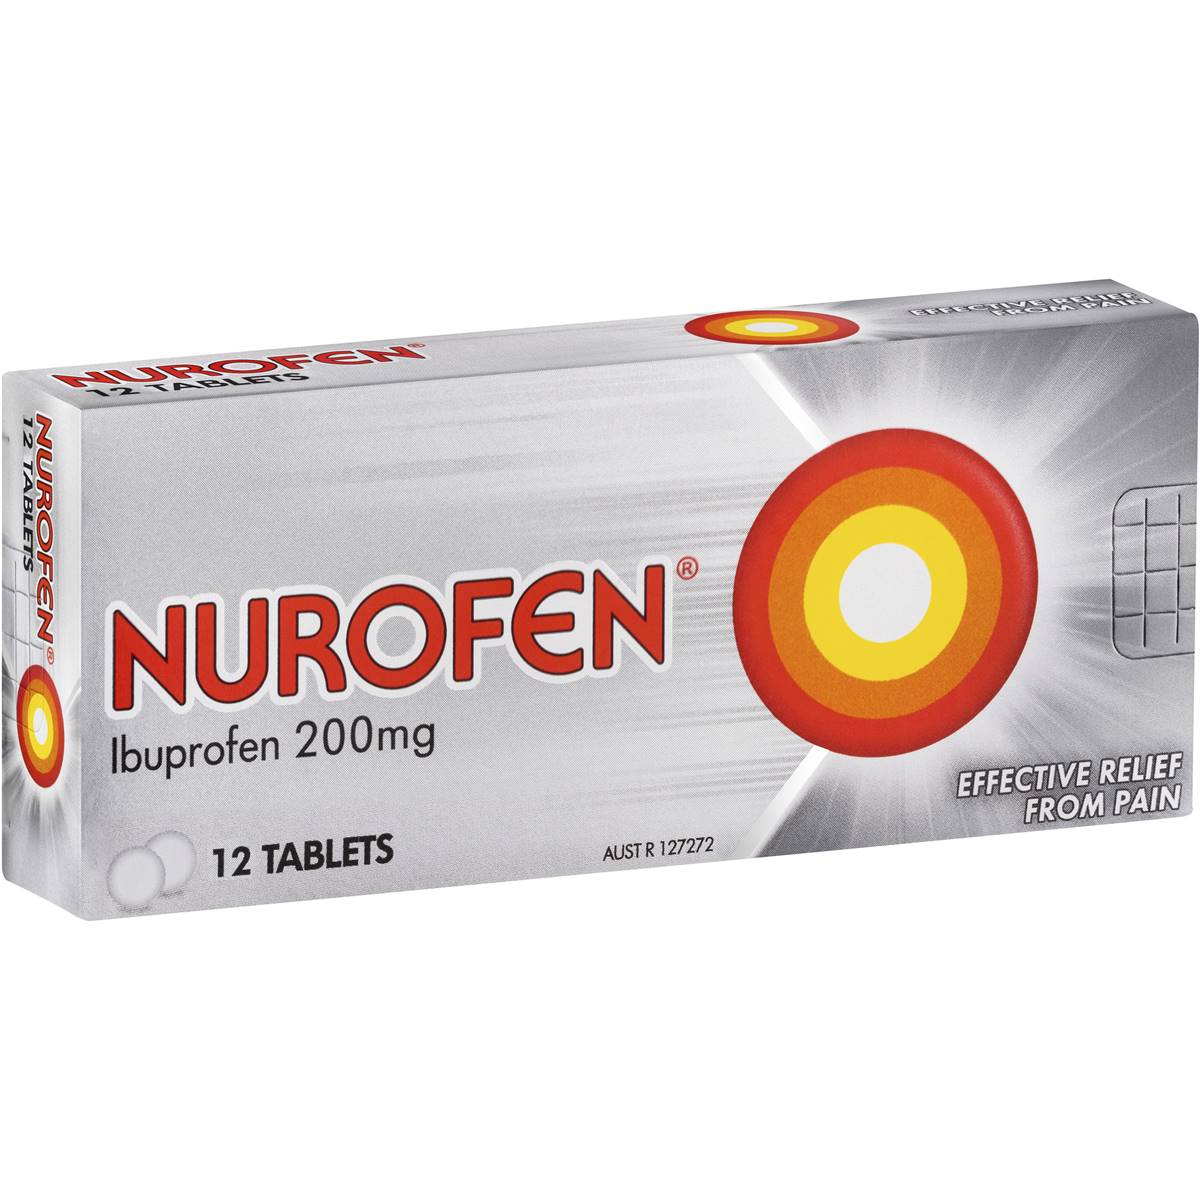 Nurofen Pain and Inflammation Relief Tablets - 12 Pack 200mg Default Title